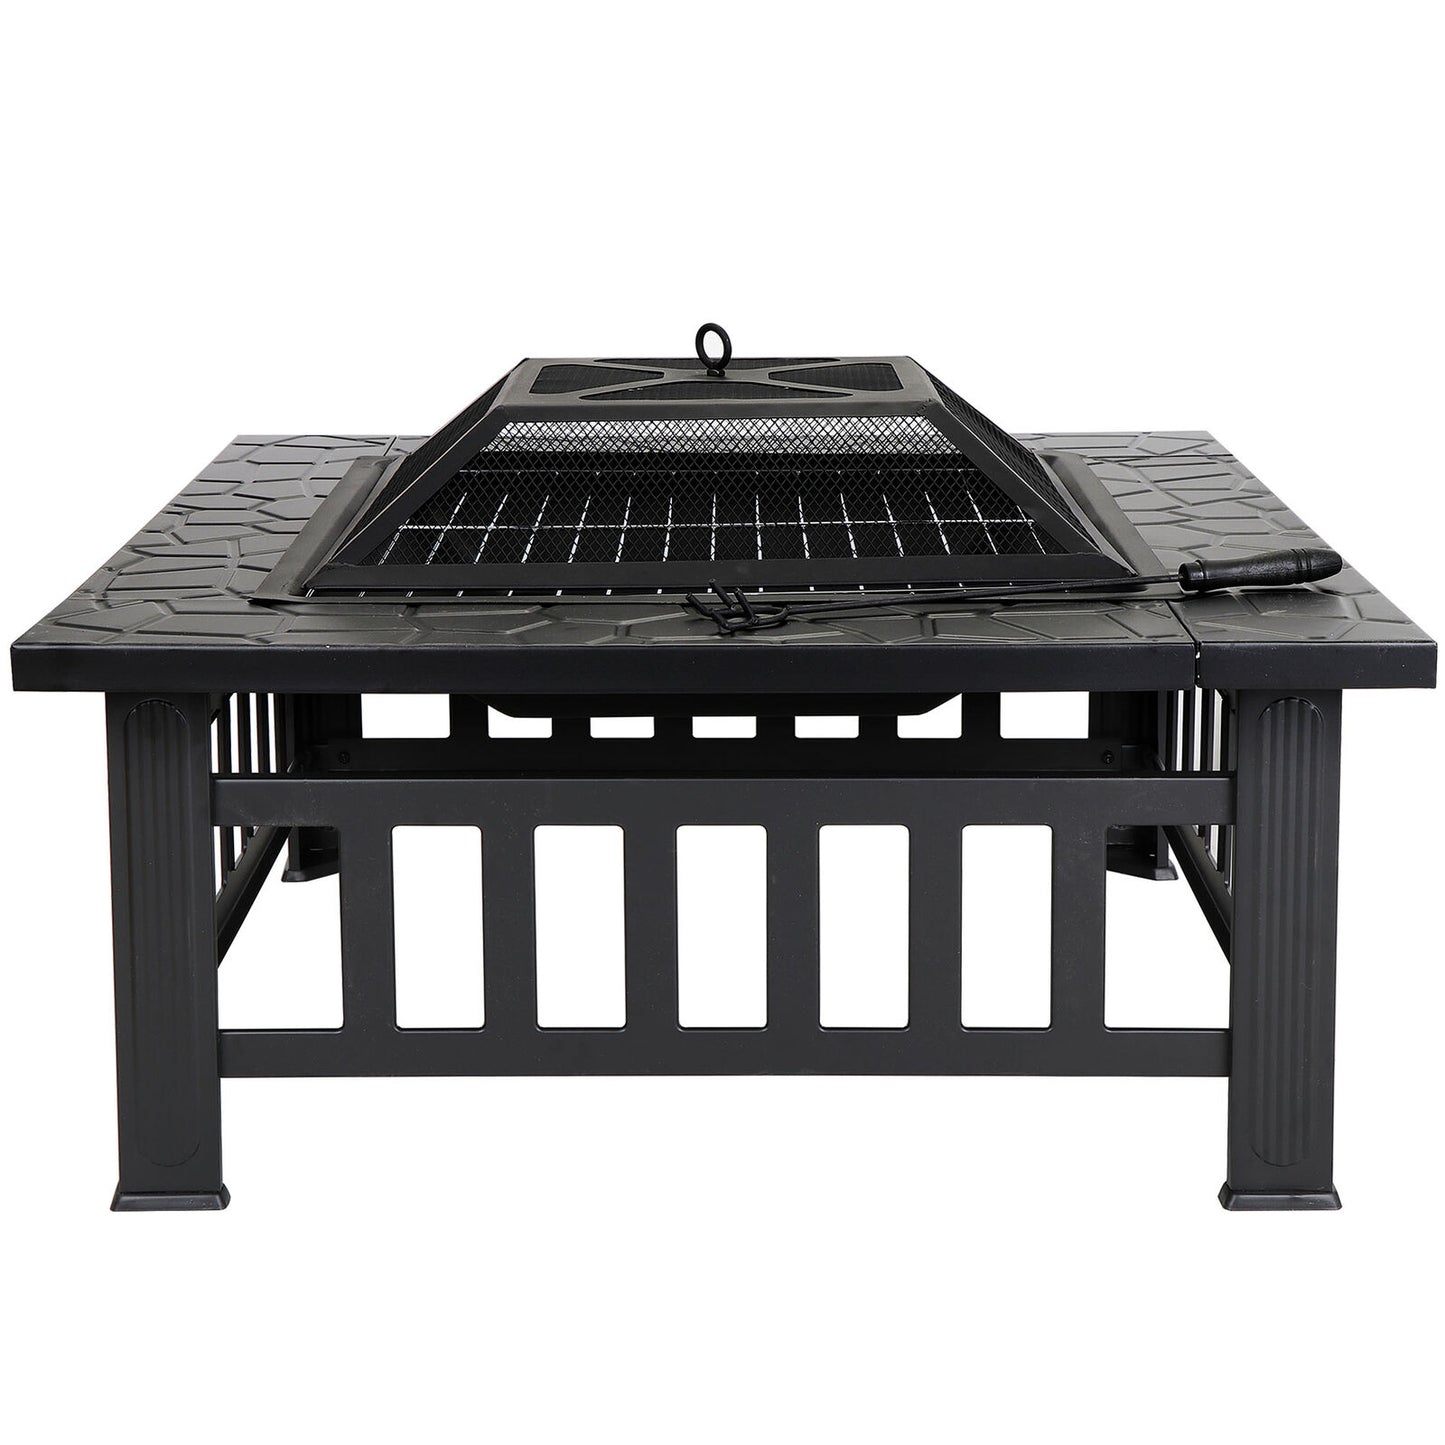 32"Wood Fire Pit Square Metal Backyard Patio Garden Stove W/Cover Outdoor Black